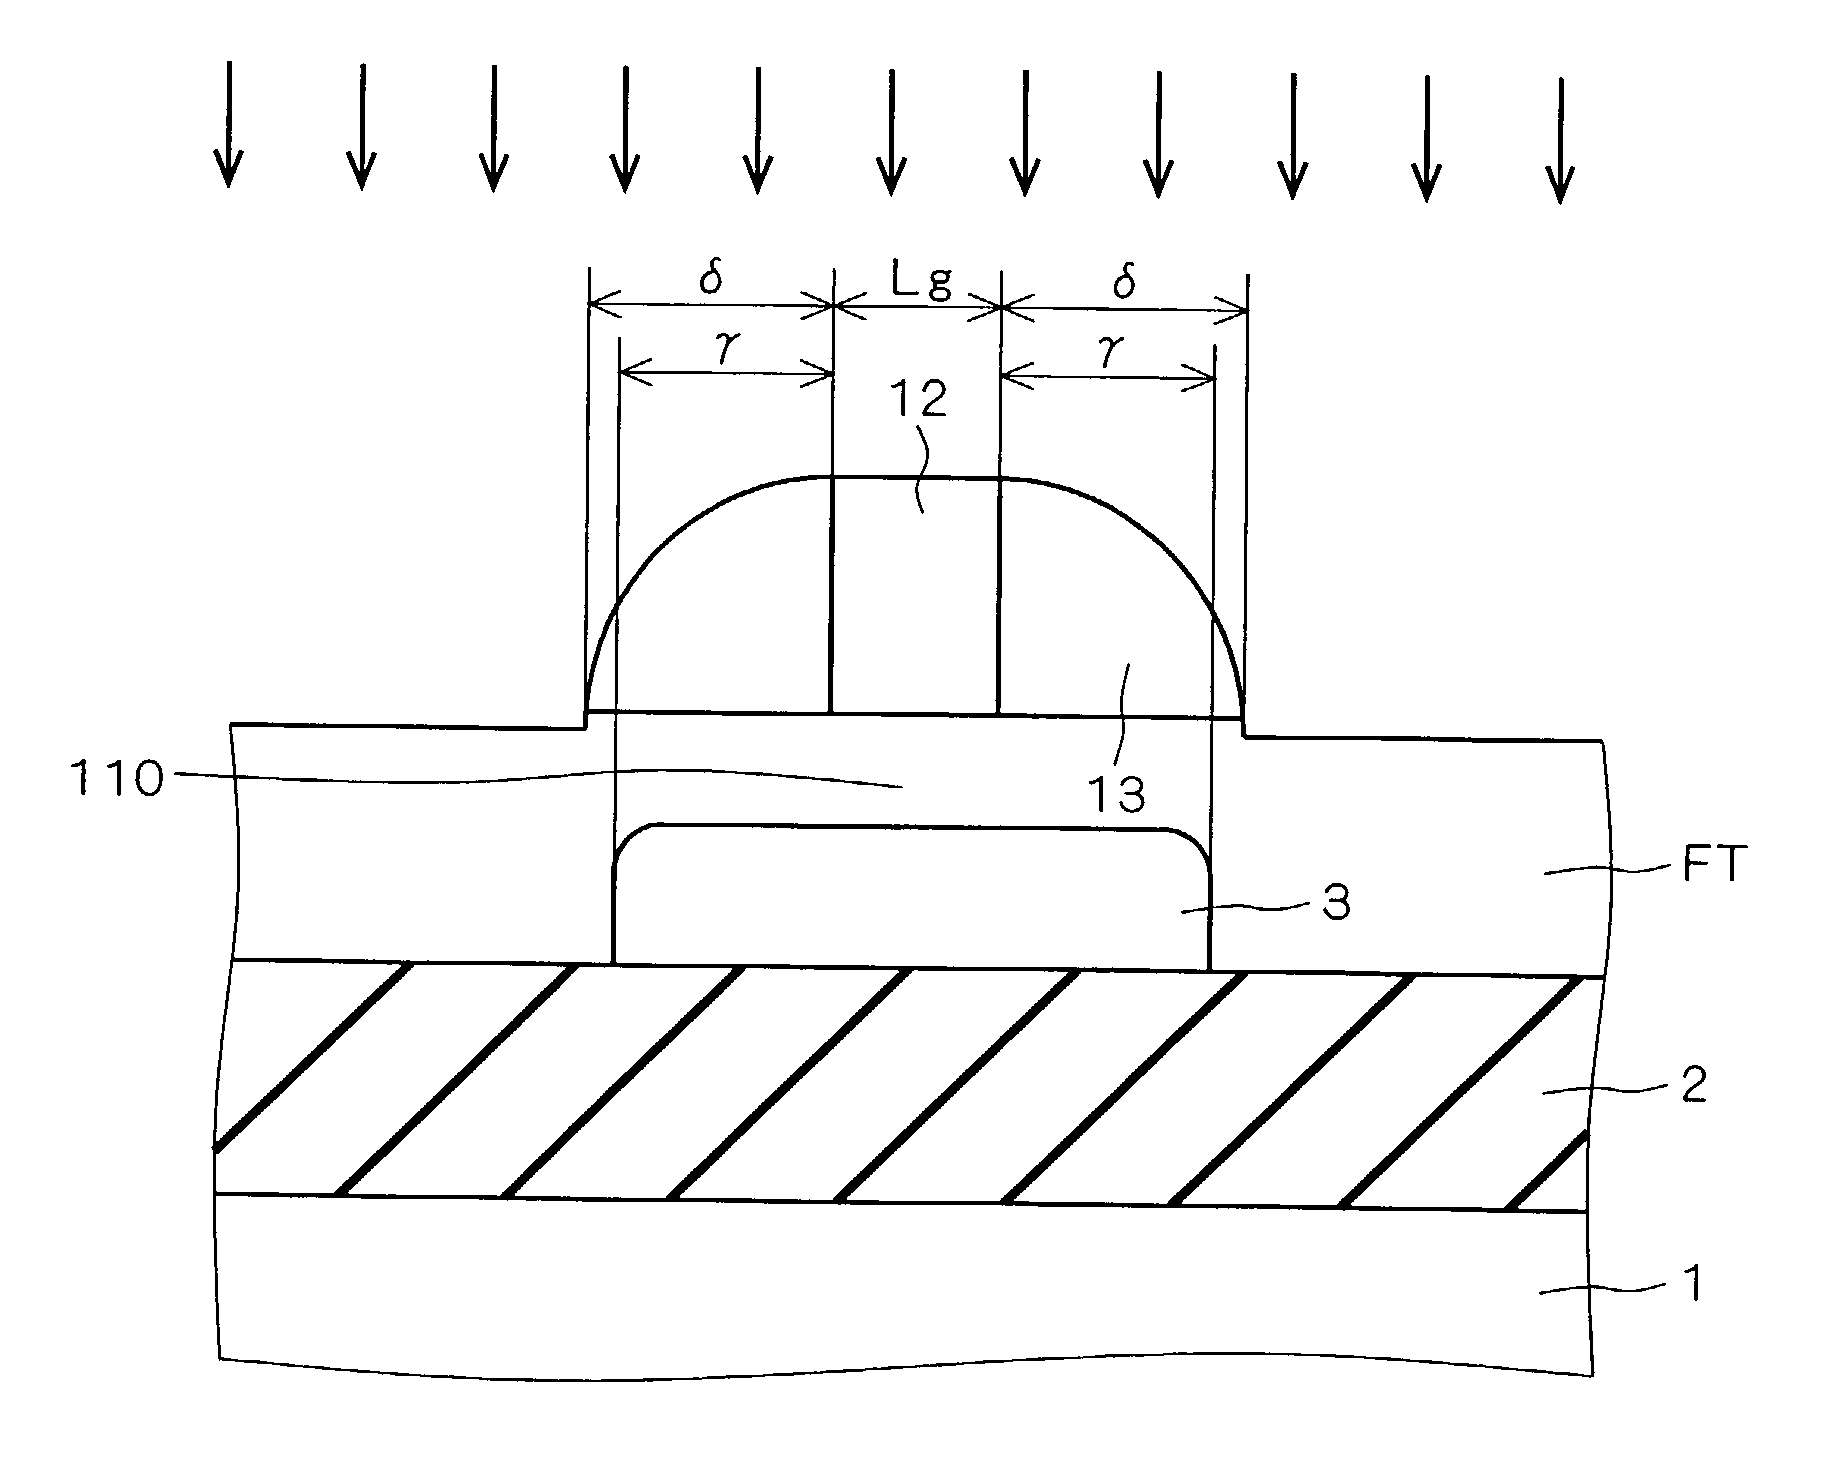 MOS transistor on an SOI substrate with a body contact and a gate insulating film with variable thickness